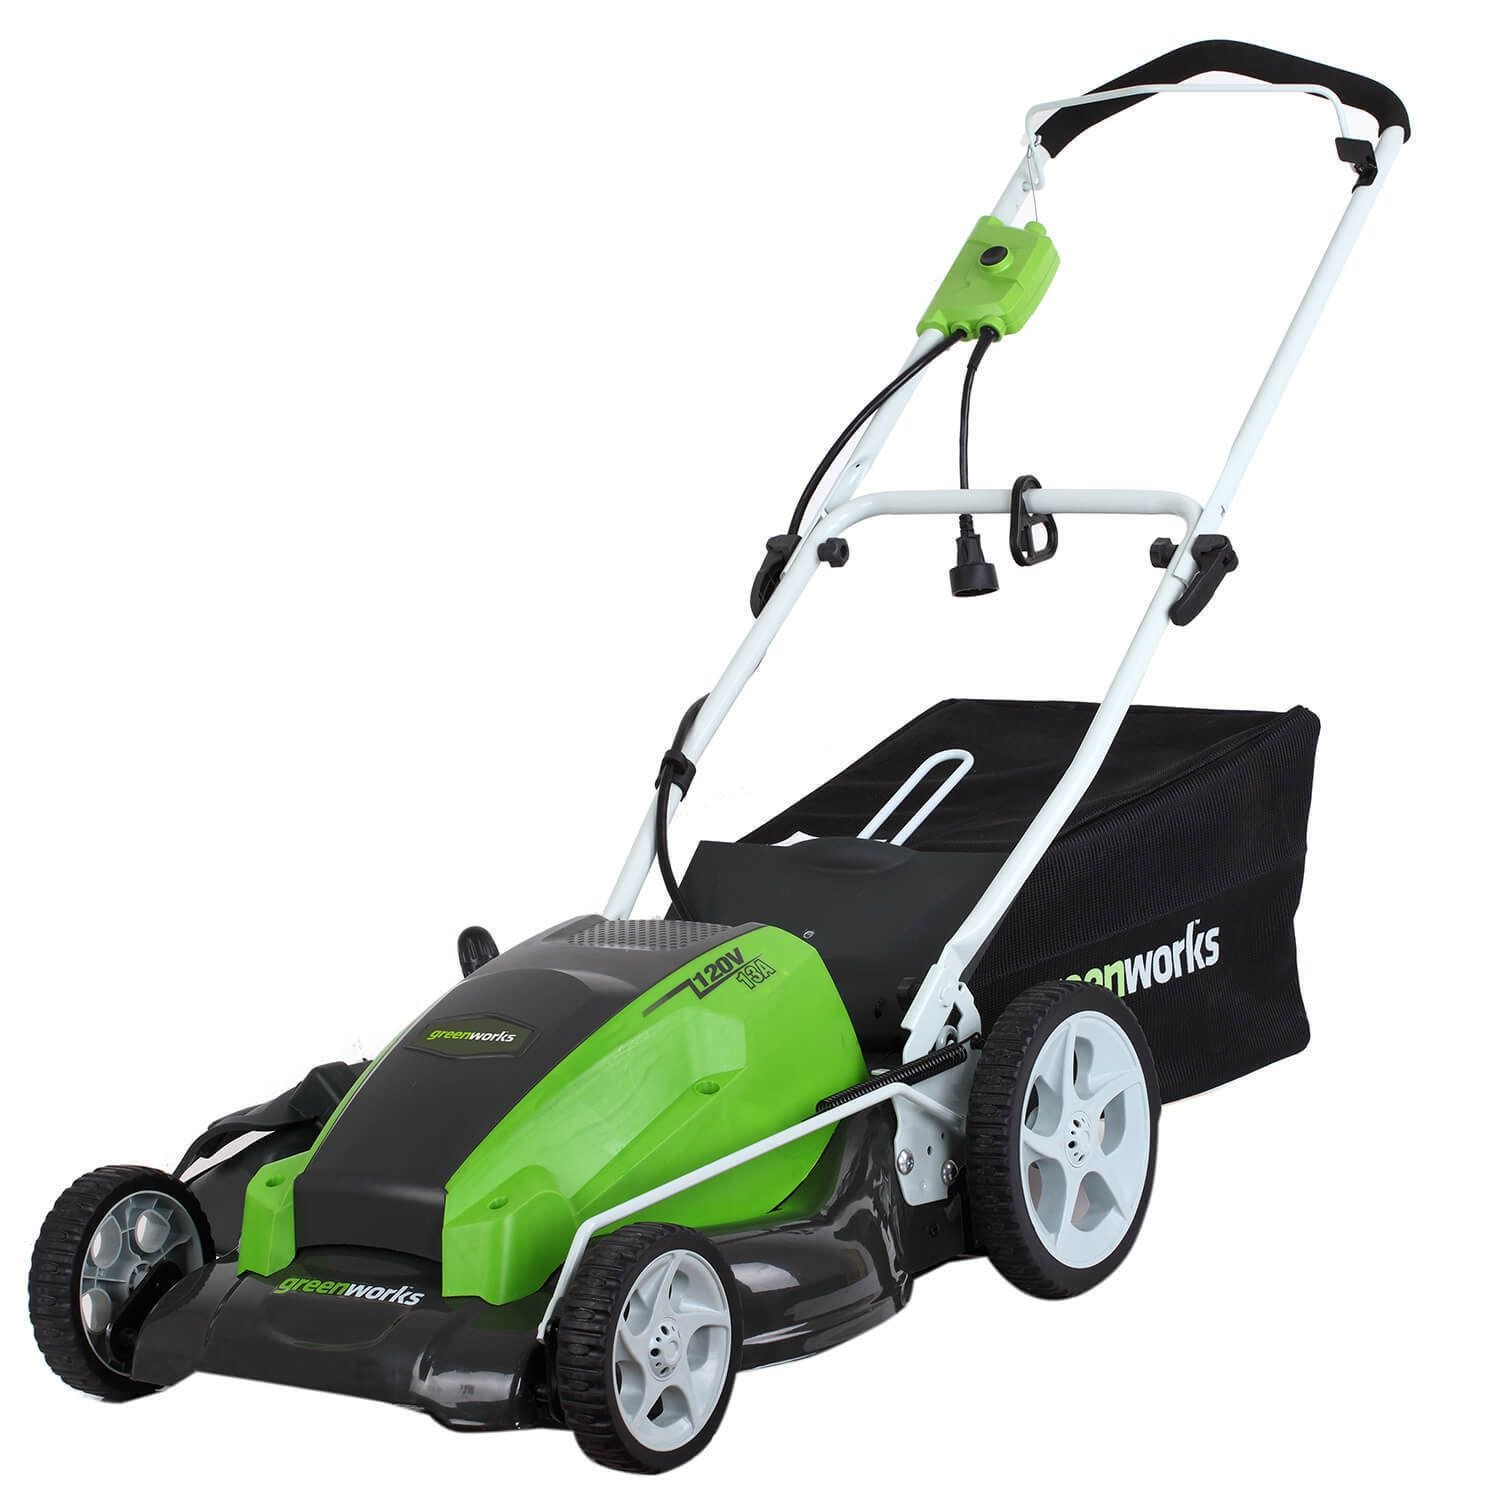 Greenworks 13 Amp 21" Corded Electric Walk-Behind Push Lawn Mower 25112 - image 1 of 12